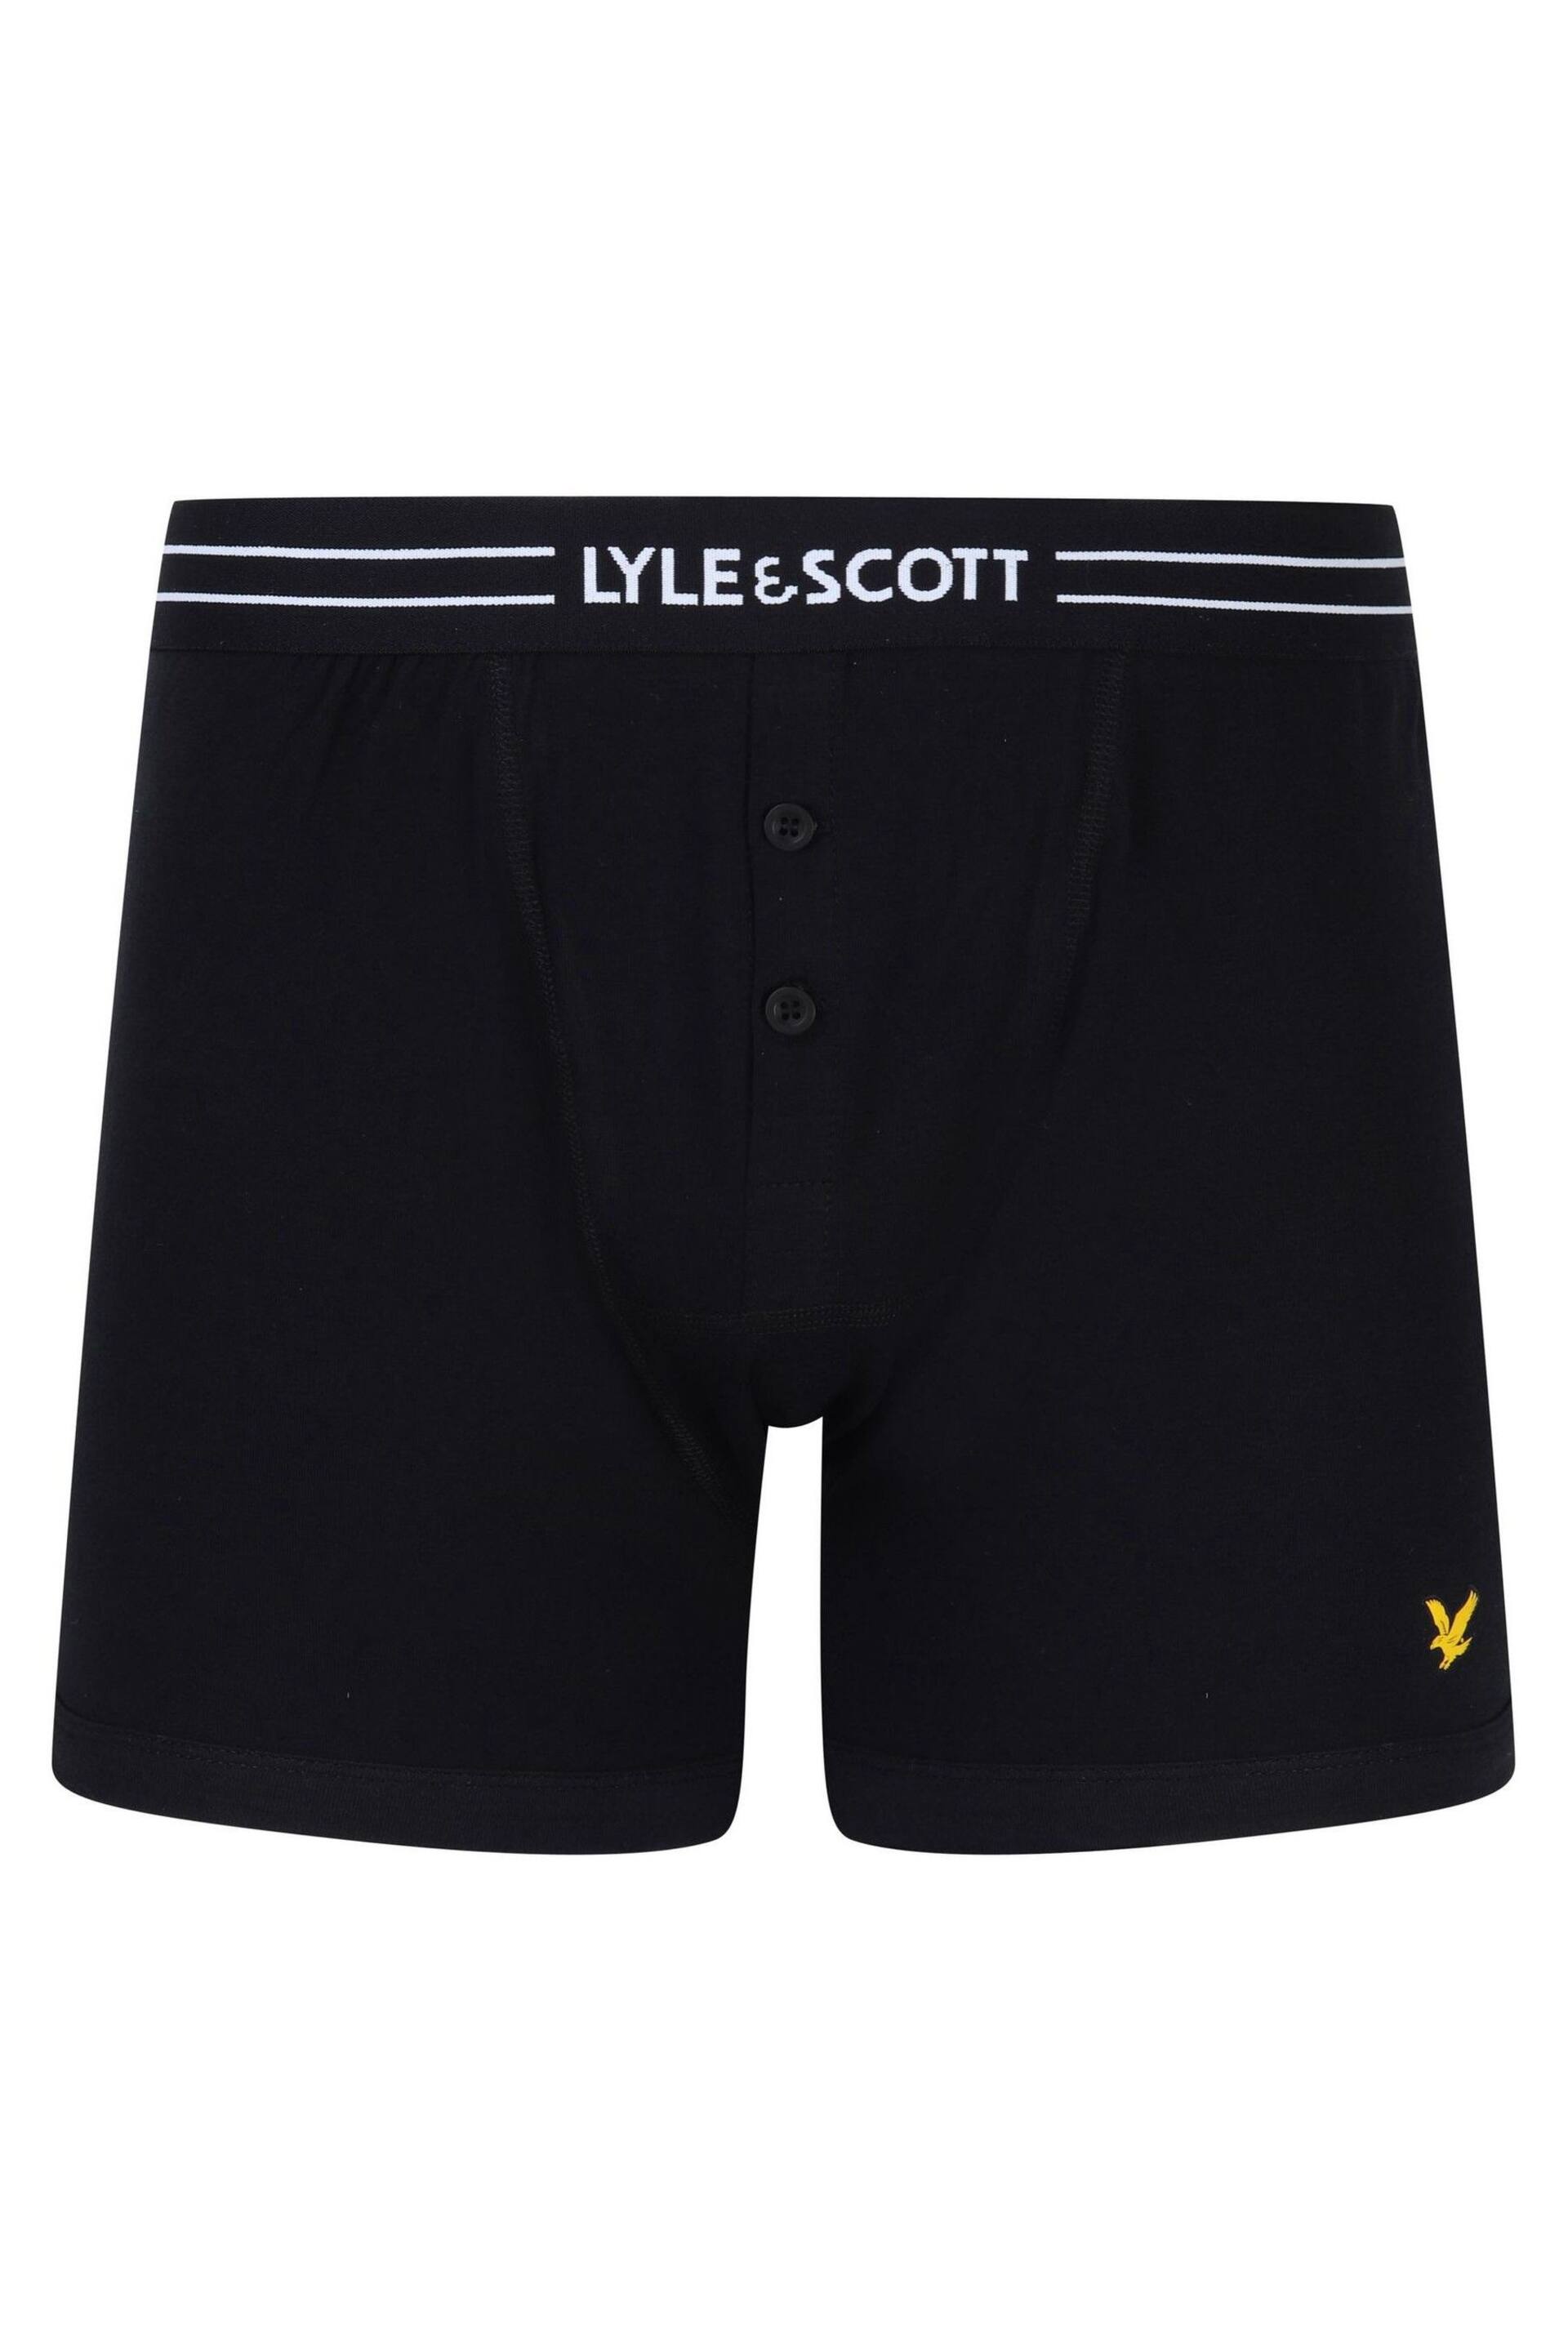 Lyle & Scott Button Fly Trunks Three Pack - Image 2 of 4